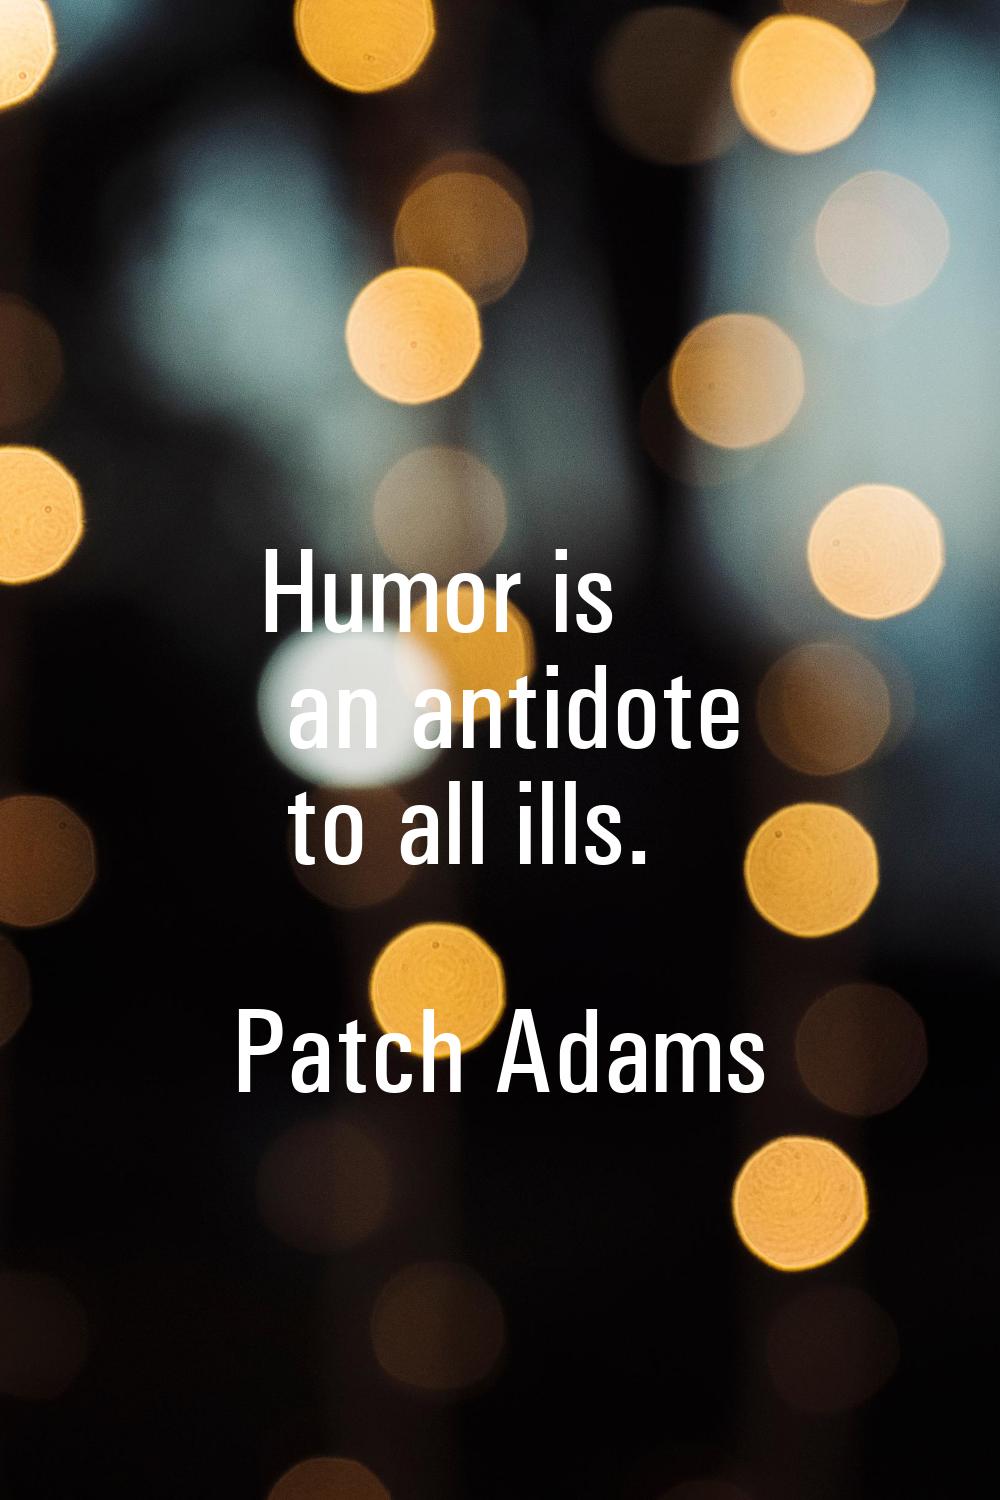 Humor is an antidote to all ills.